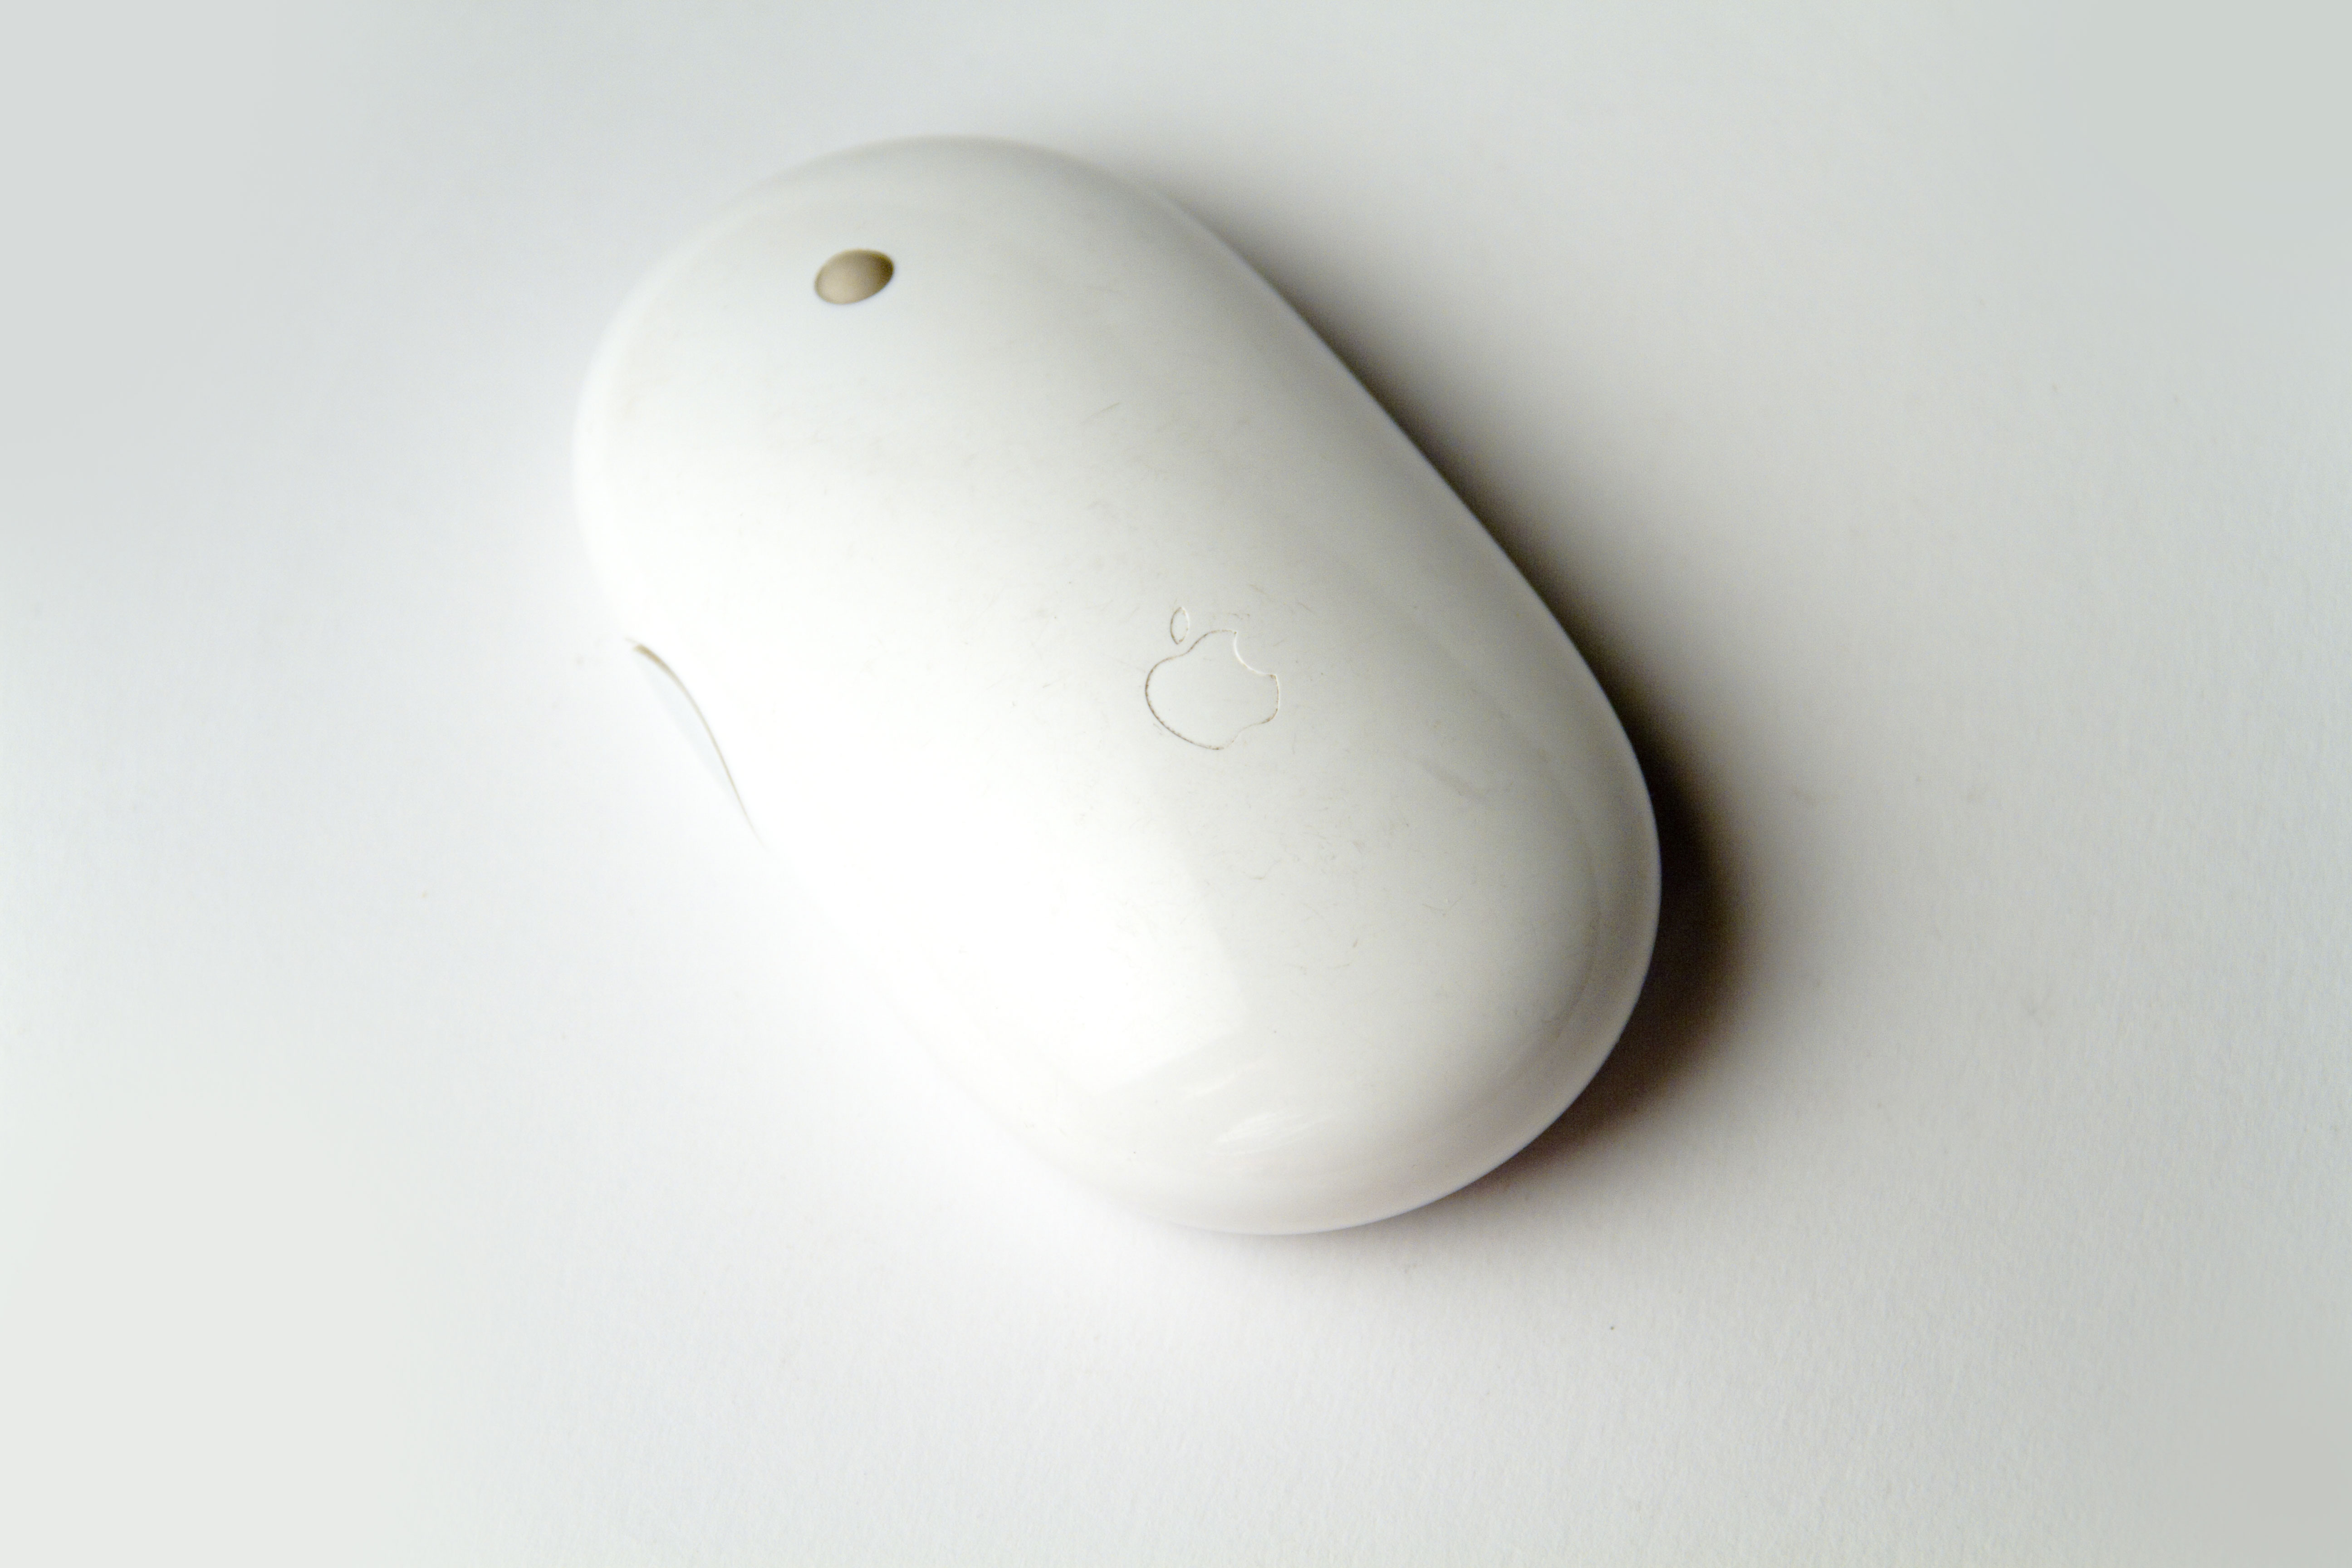 apple wireless mouse update 1.0